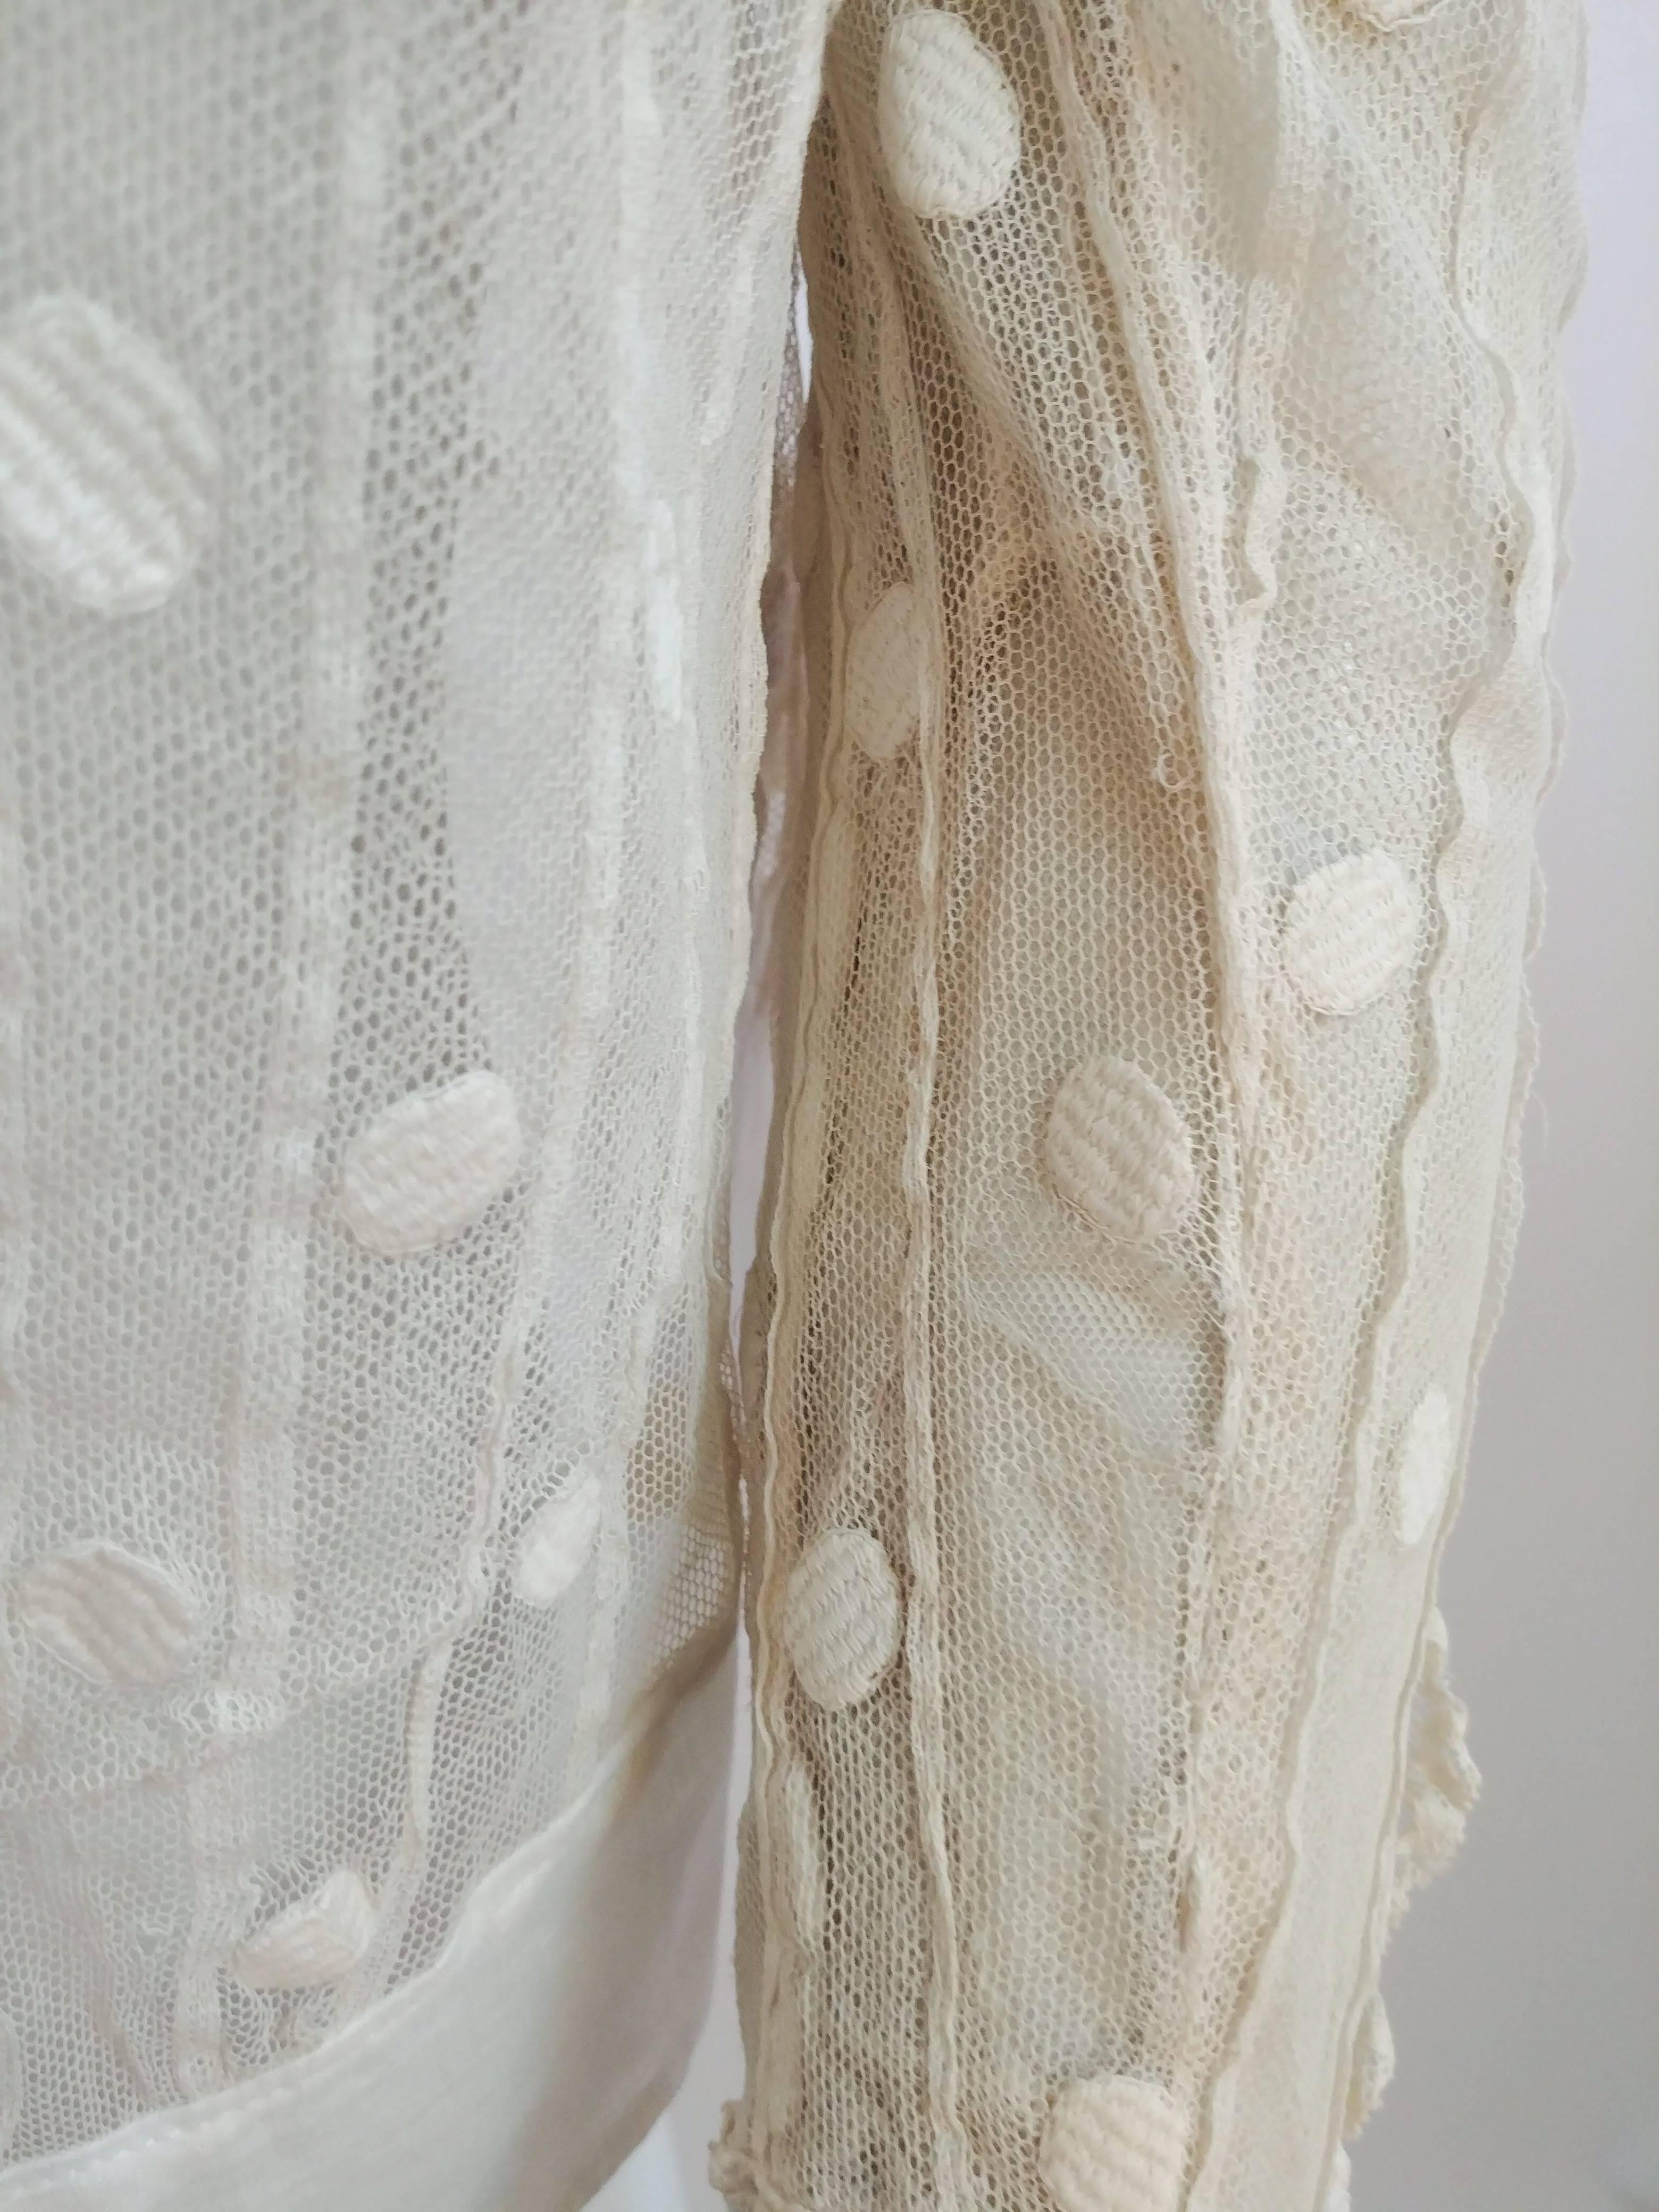 Edwardian Polka Dot Sheer Lace Blouse In Good Condition For Sale In San Francisco, CA